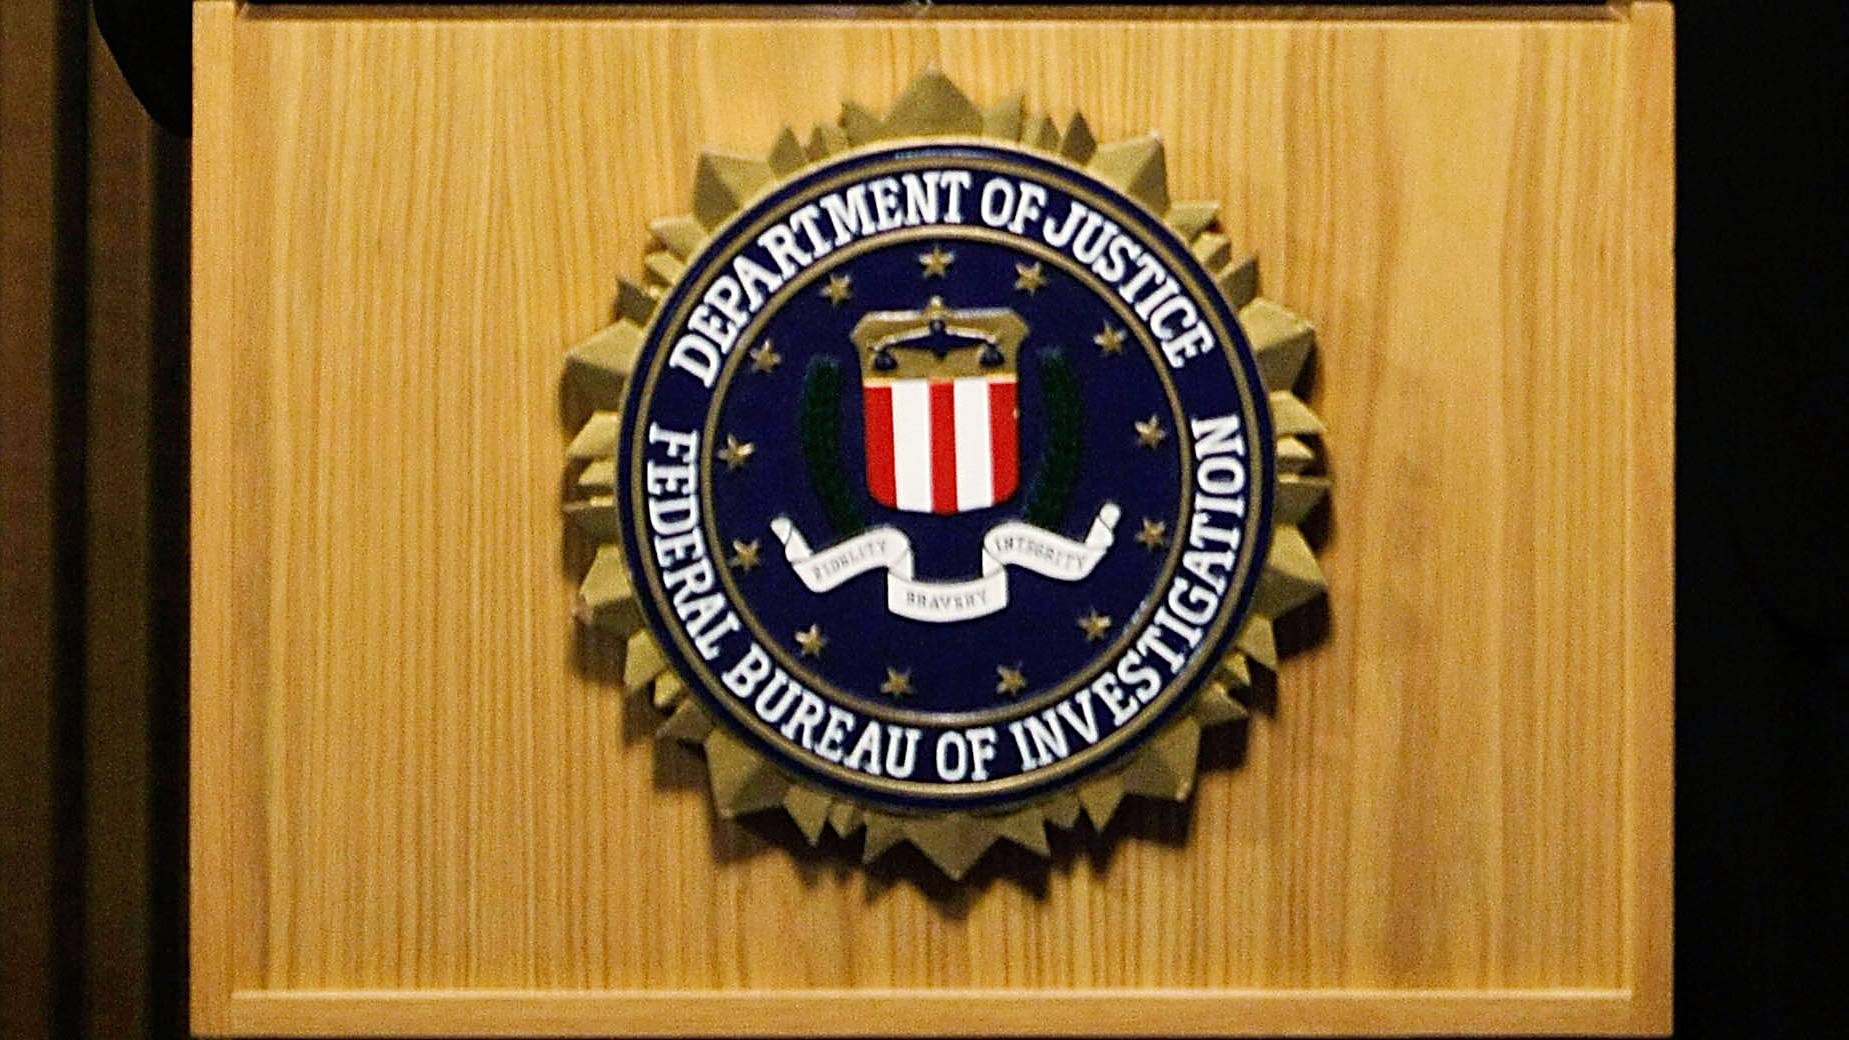 FBI Probed in Racial Profiling Case - The American Civil Liberties Union is suing the FBI for allegedly using unconstitutional practices to gain information about certain racial and ethnic groups. Specifically, the ACLU is looking into the FBI's use of the Domestic Intelligence Operations Guide, which they believe may have been used to investigate people and businesses in Michigan considered &quot;ethnic-oriented,&quot; writes a Michigan public radio station.(Photo: Alex Wong/Getty Images)